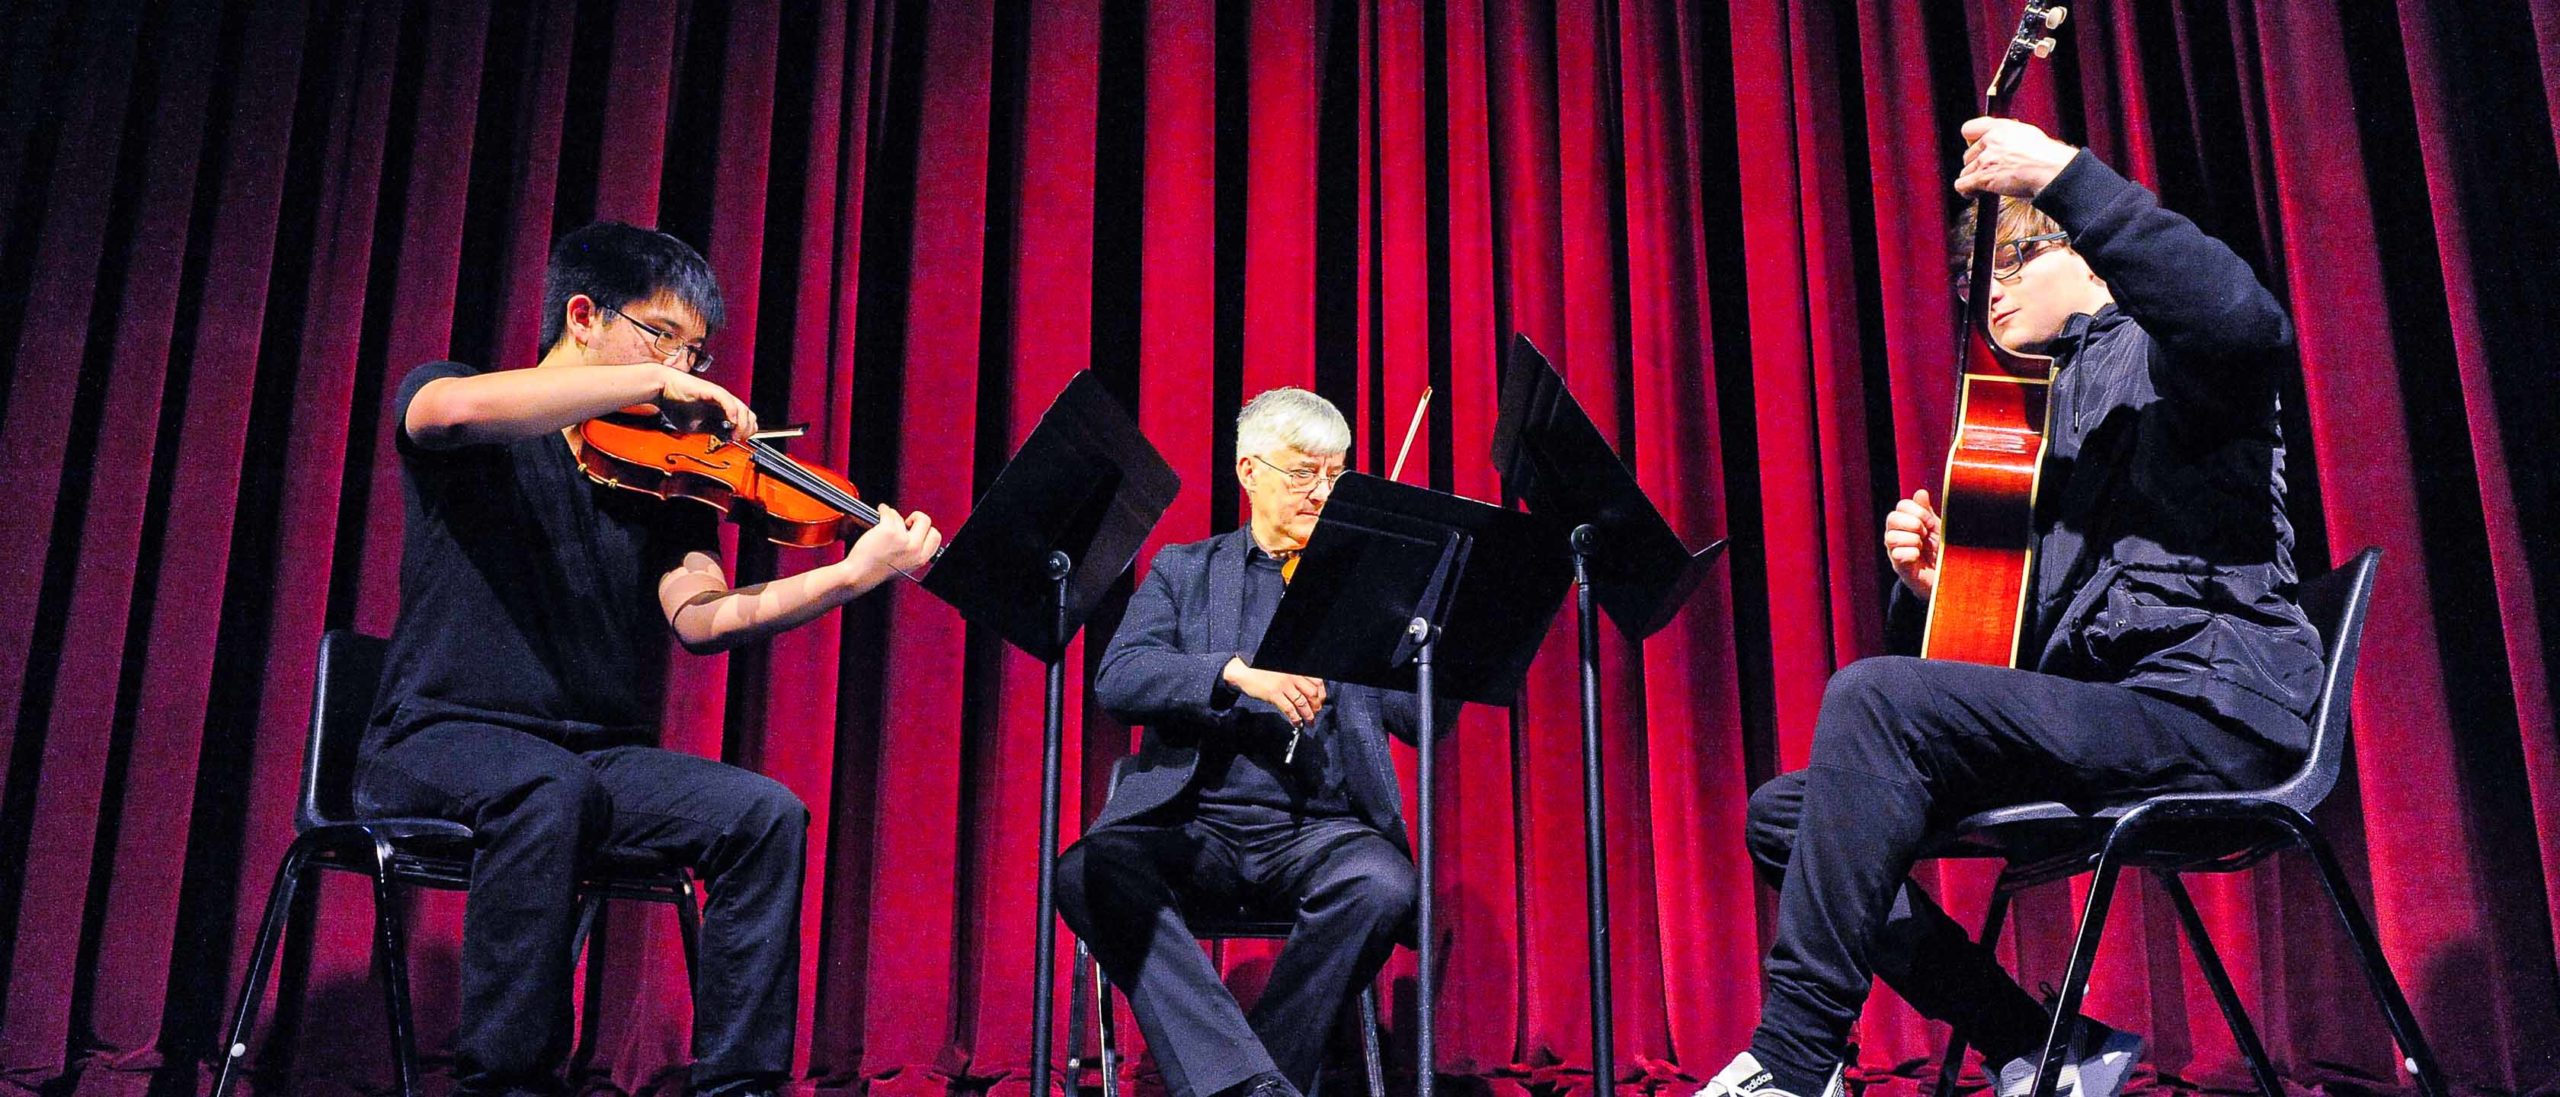 Two students an a faculty member playing string instruments on stage